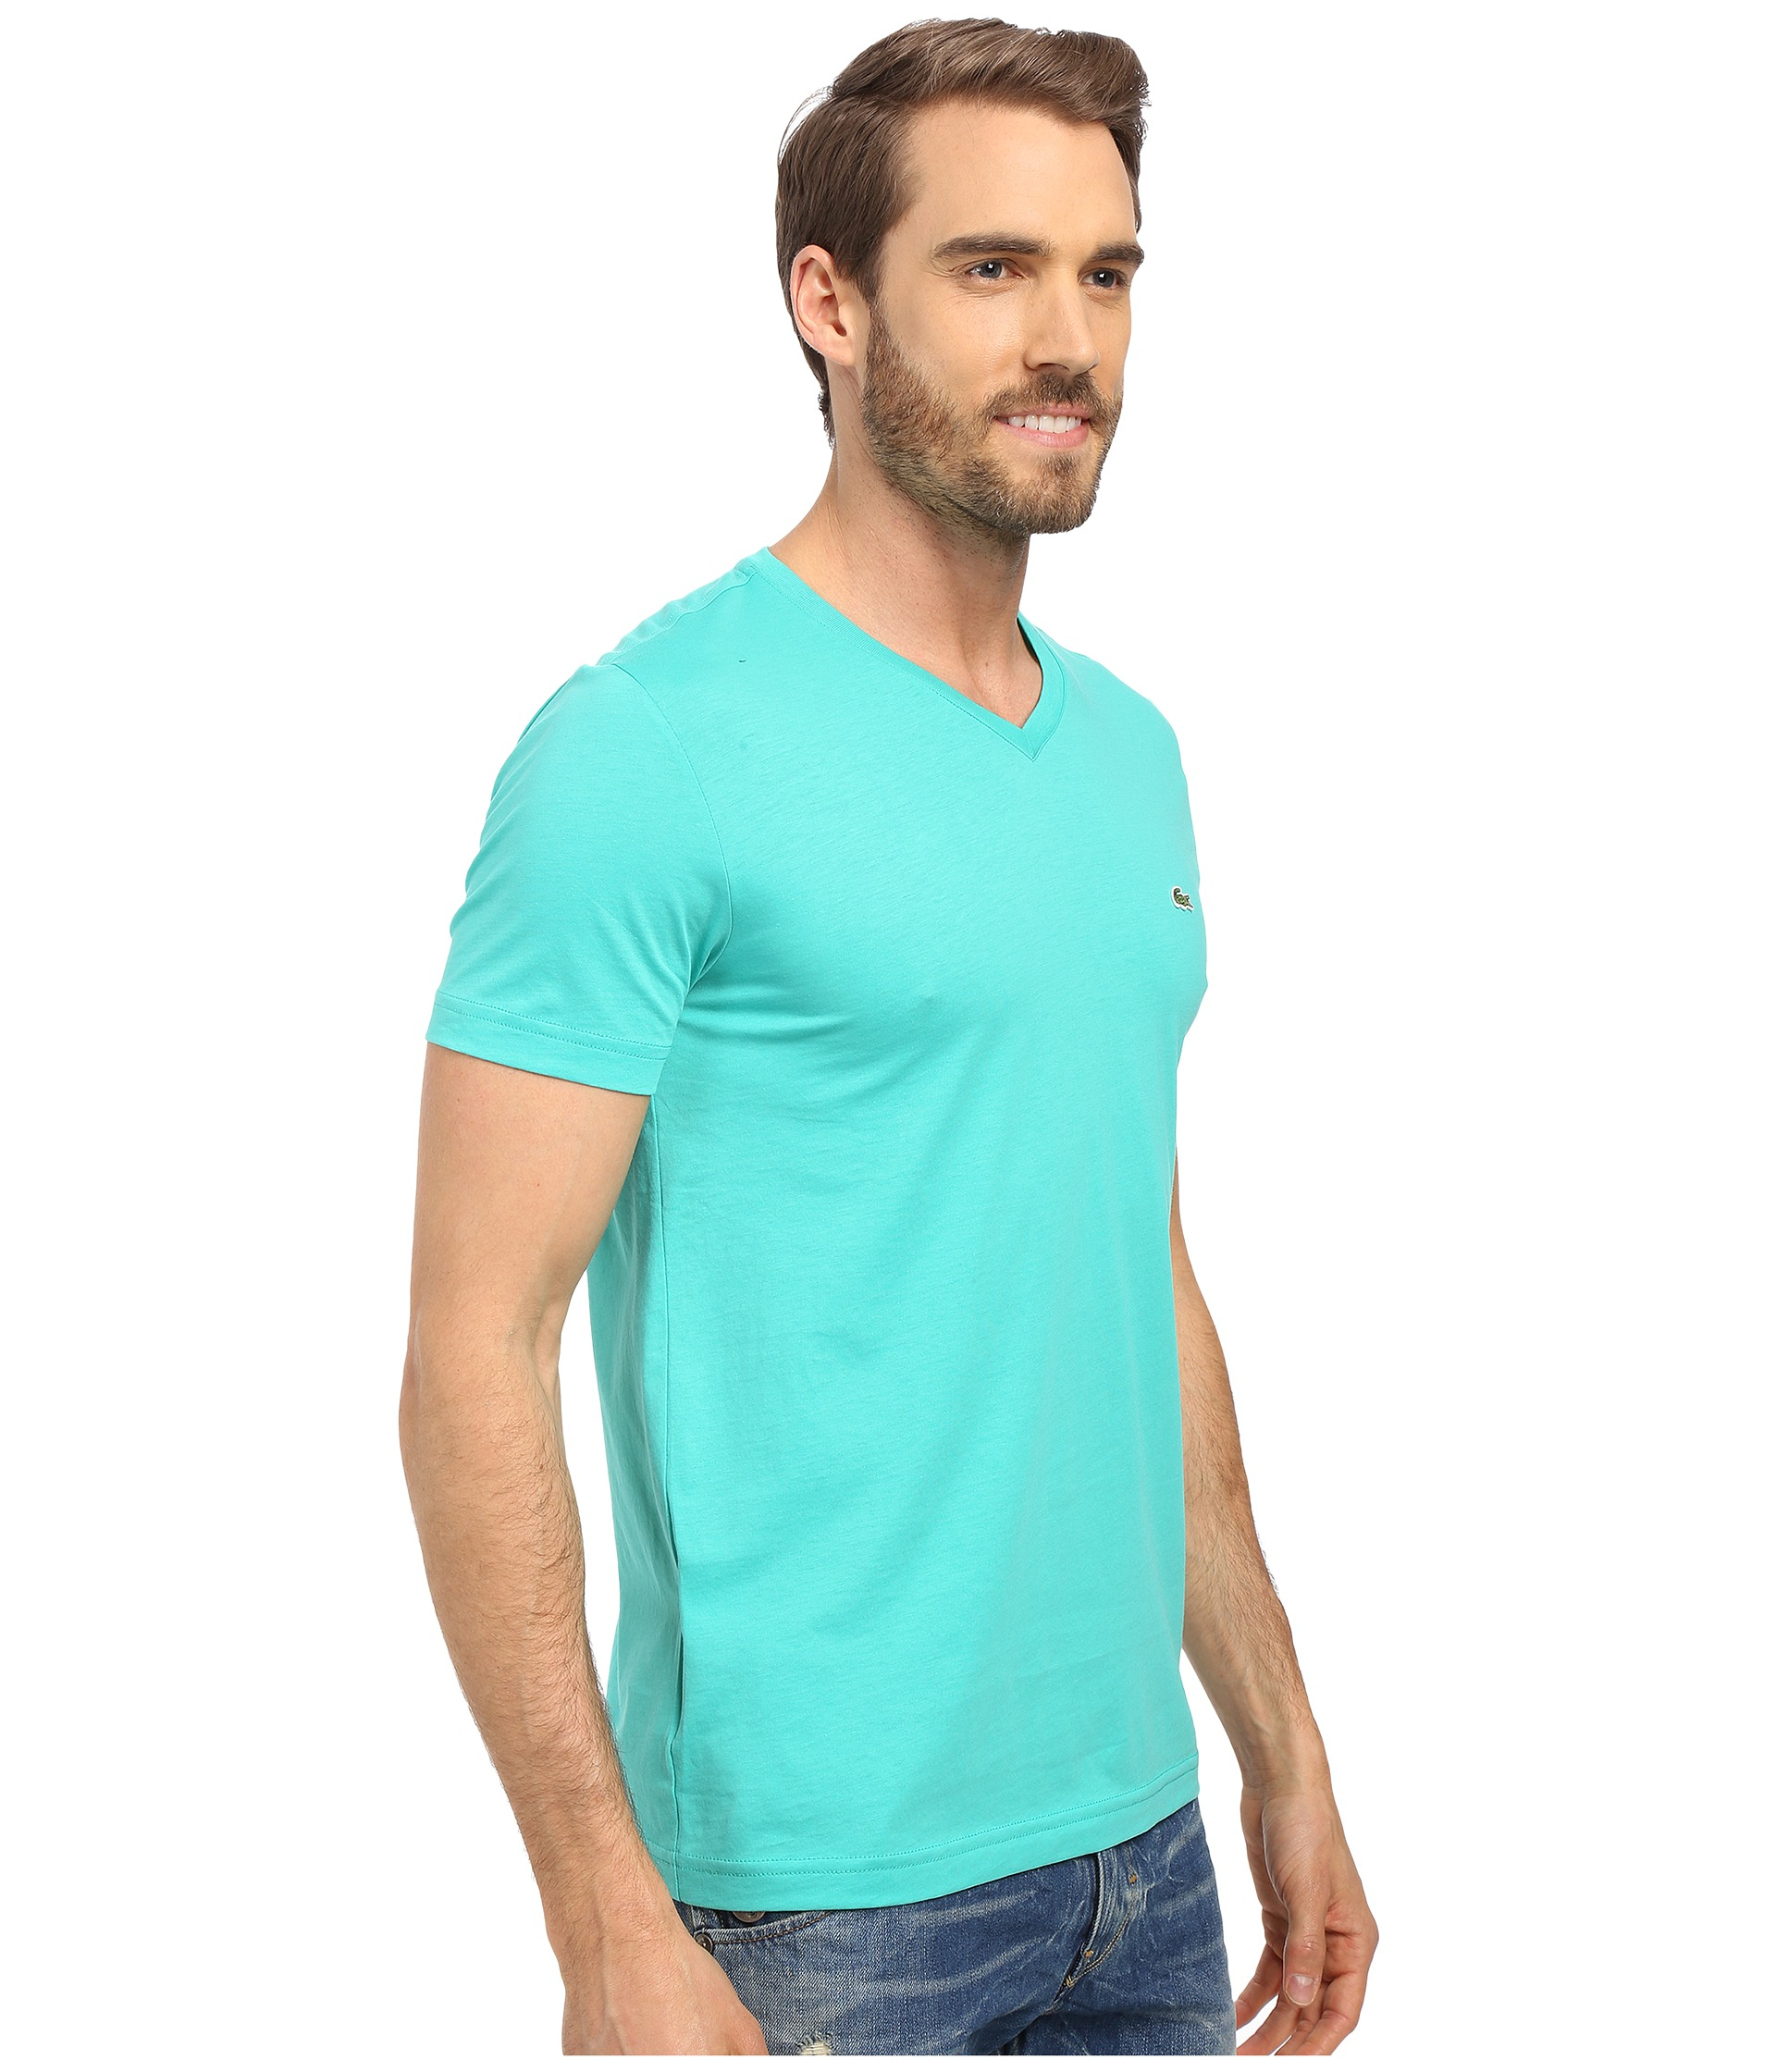 Lyst - Lacoste S/s Pima Jersey V-neck T-shirt in Green for Men